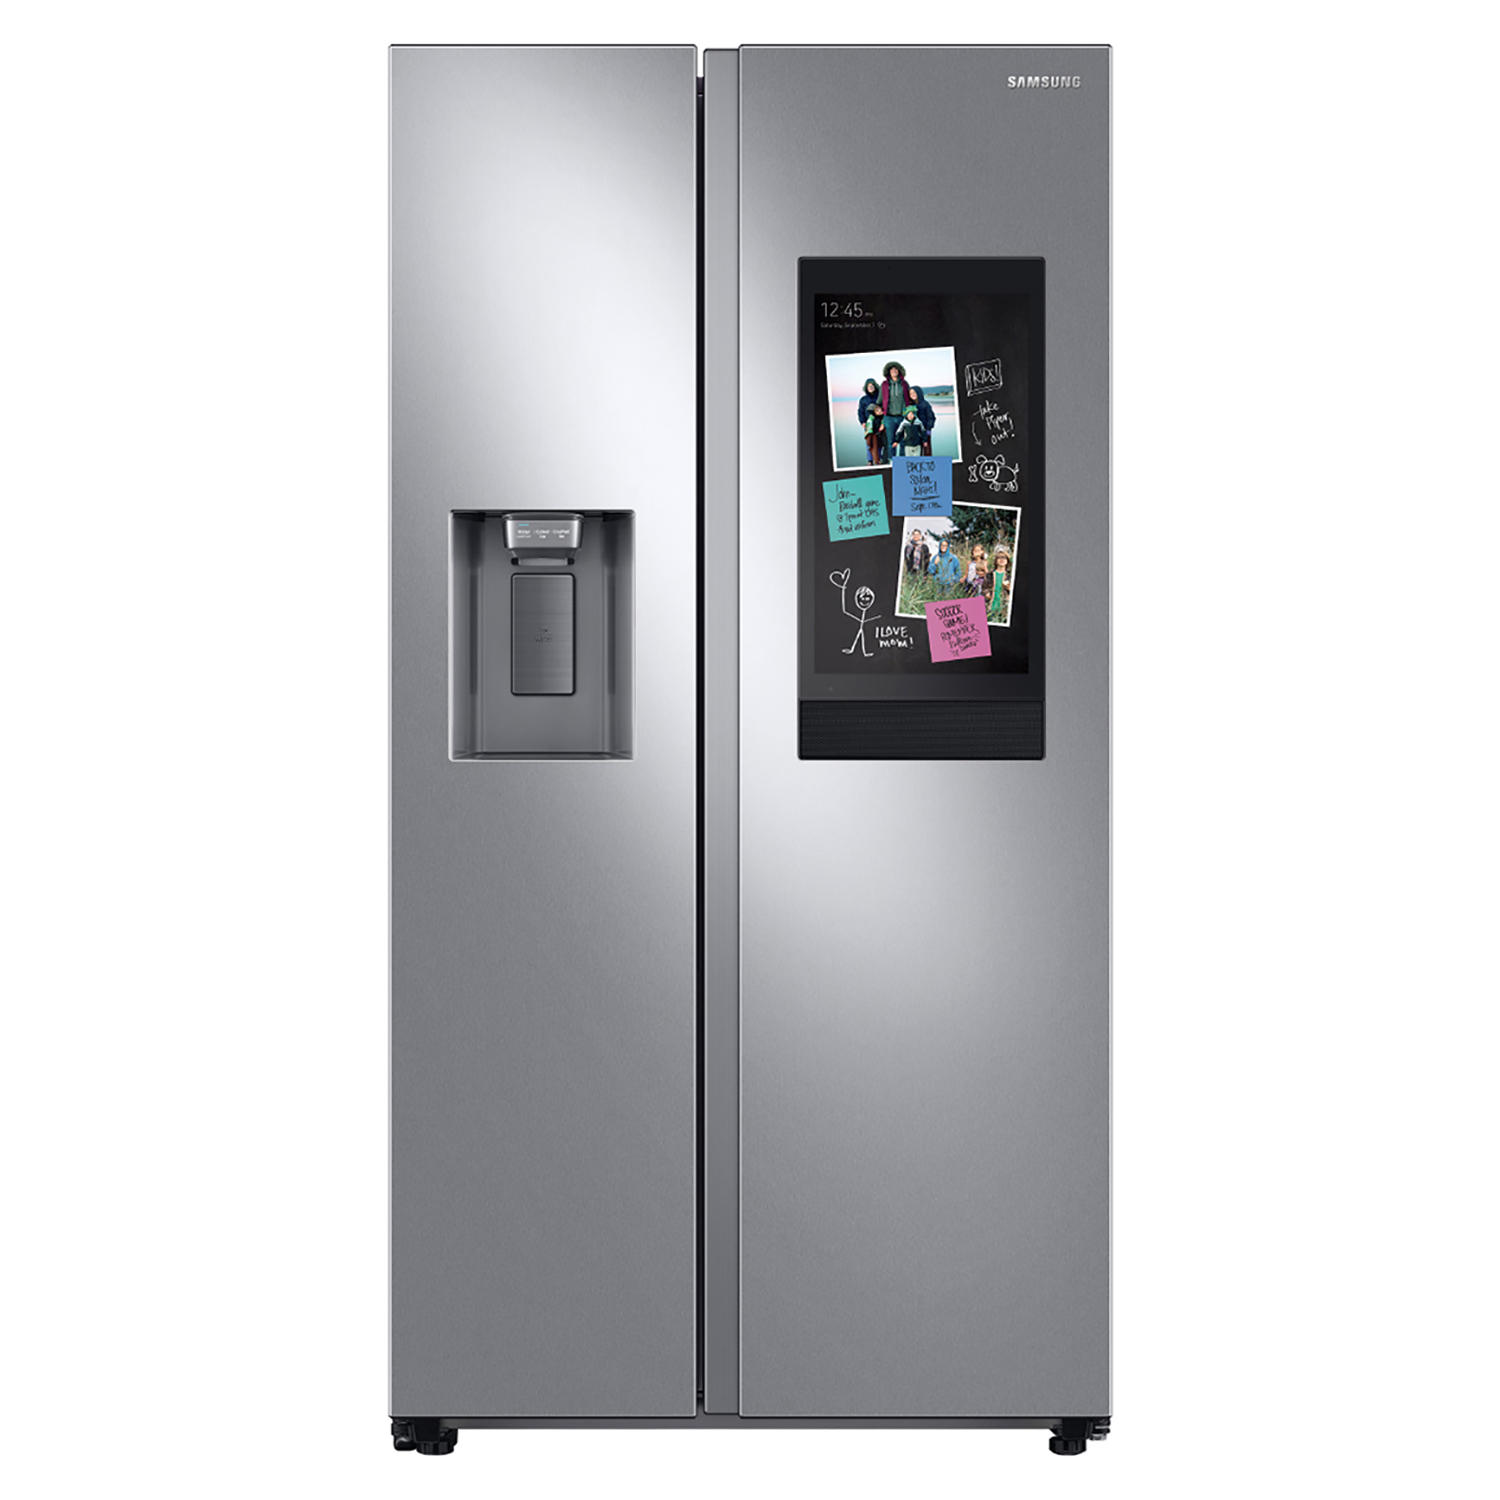 Samsung RS22T5561SR 22 cu. ft. Counter Depth Side By Side Refrigerator with Touch Screen Family Hub